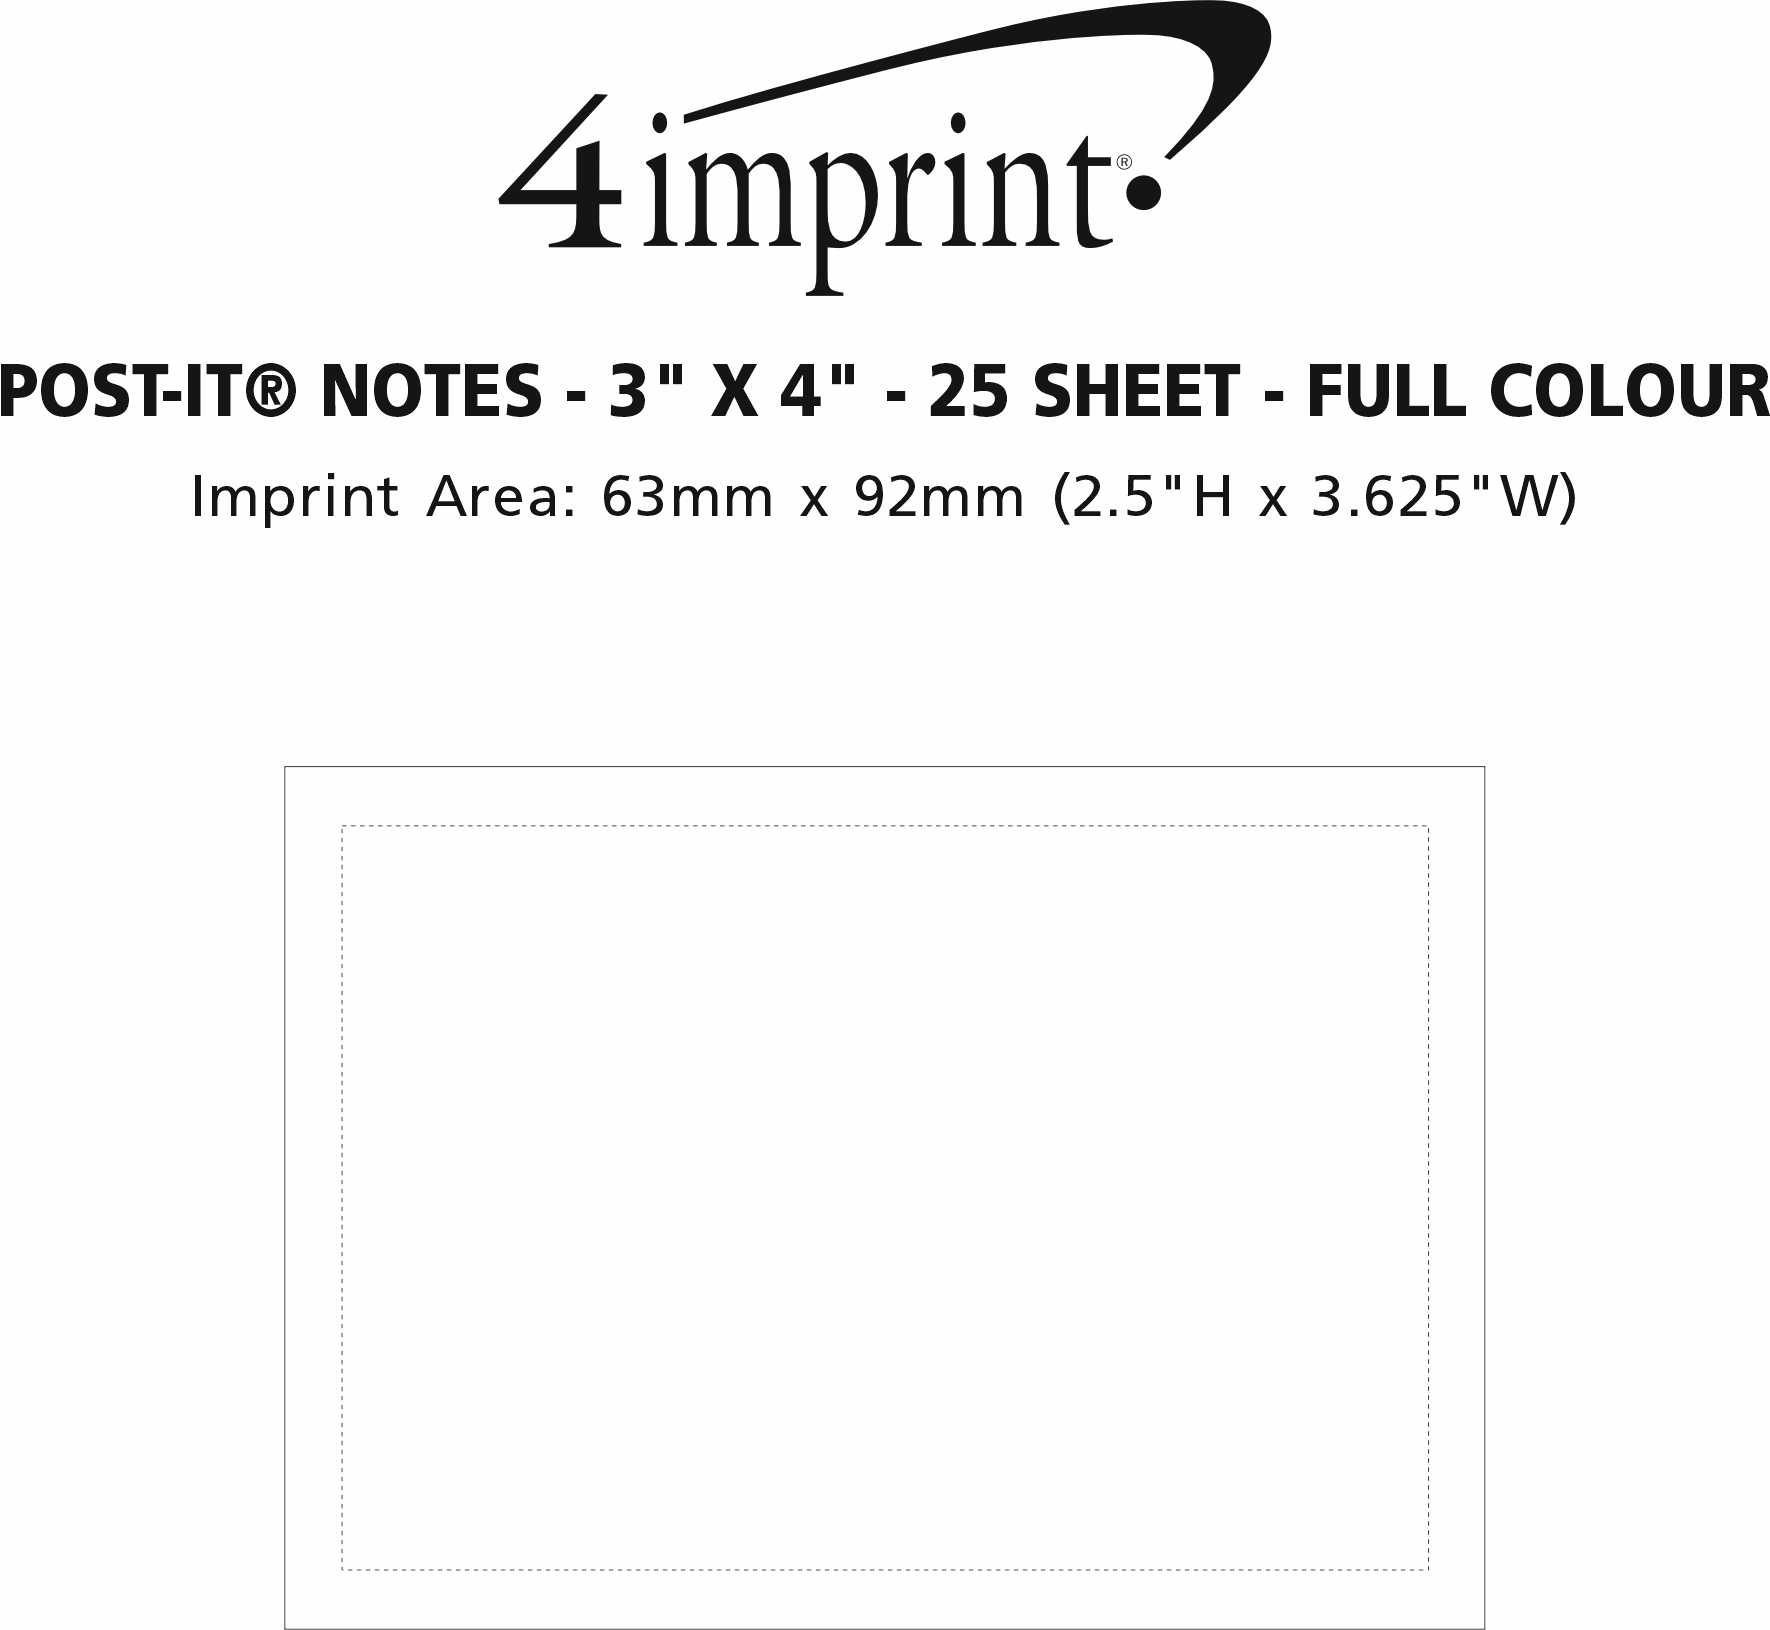 Imprint Area of Post-it® Notes - 3" x 4" - 25 Sheet - Full Colour